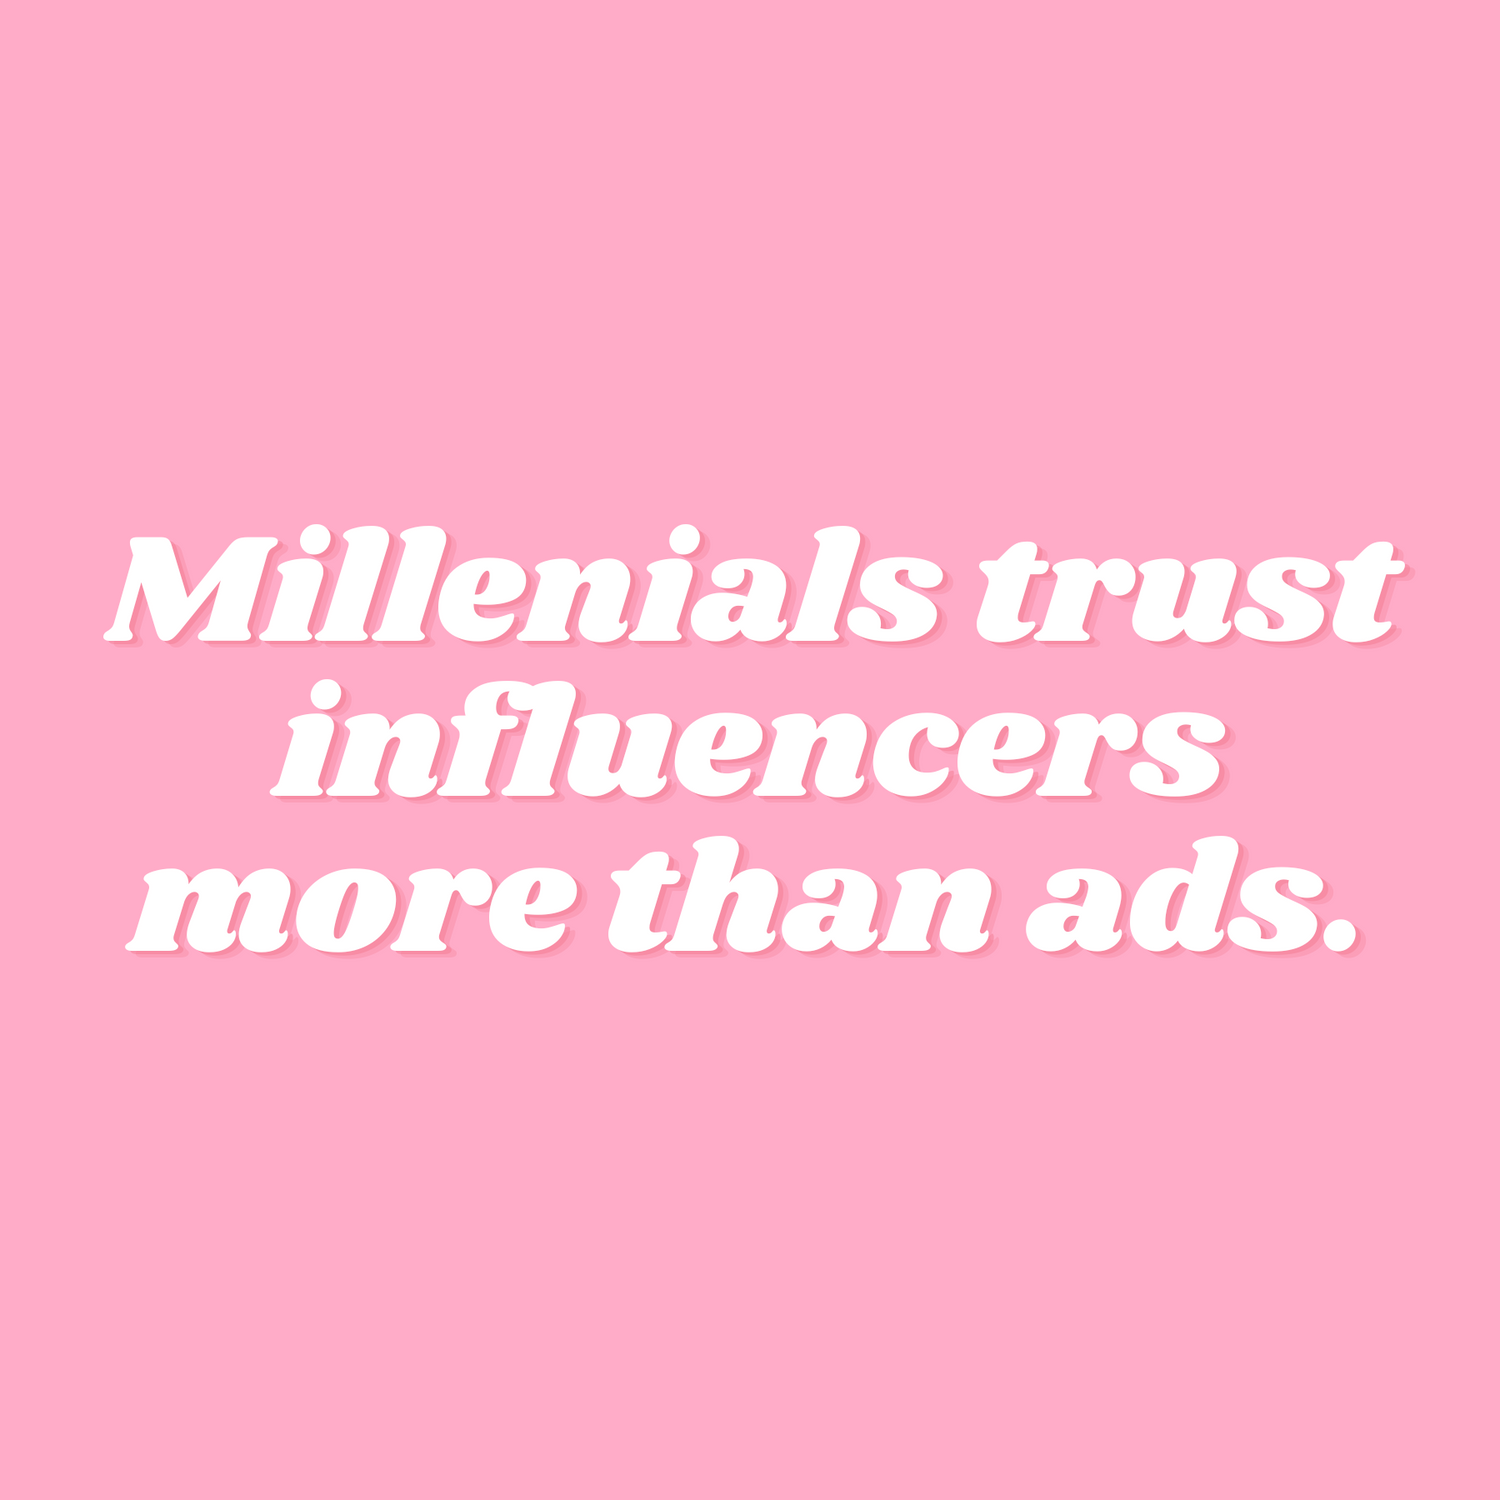 50% of millennials trust influencers more than ads and influencer marketing works with a strategy.